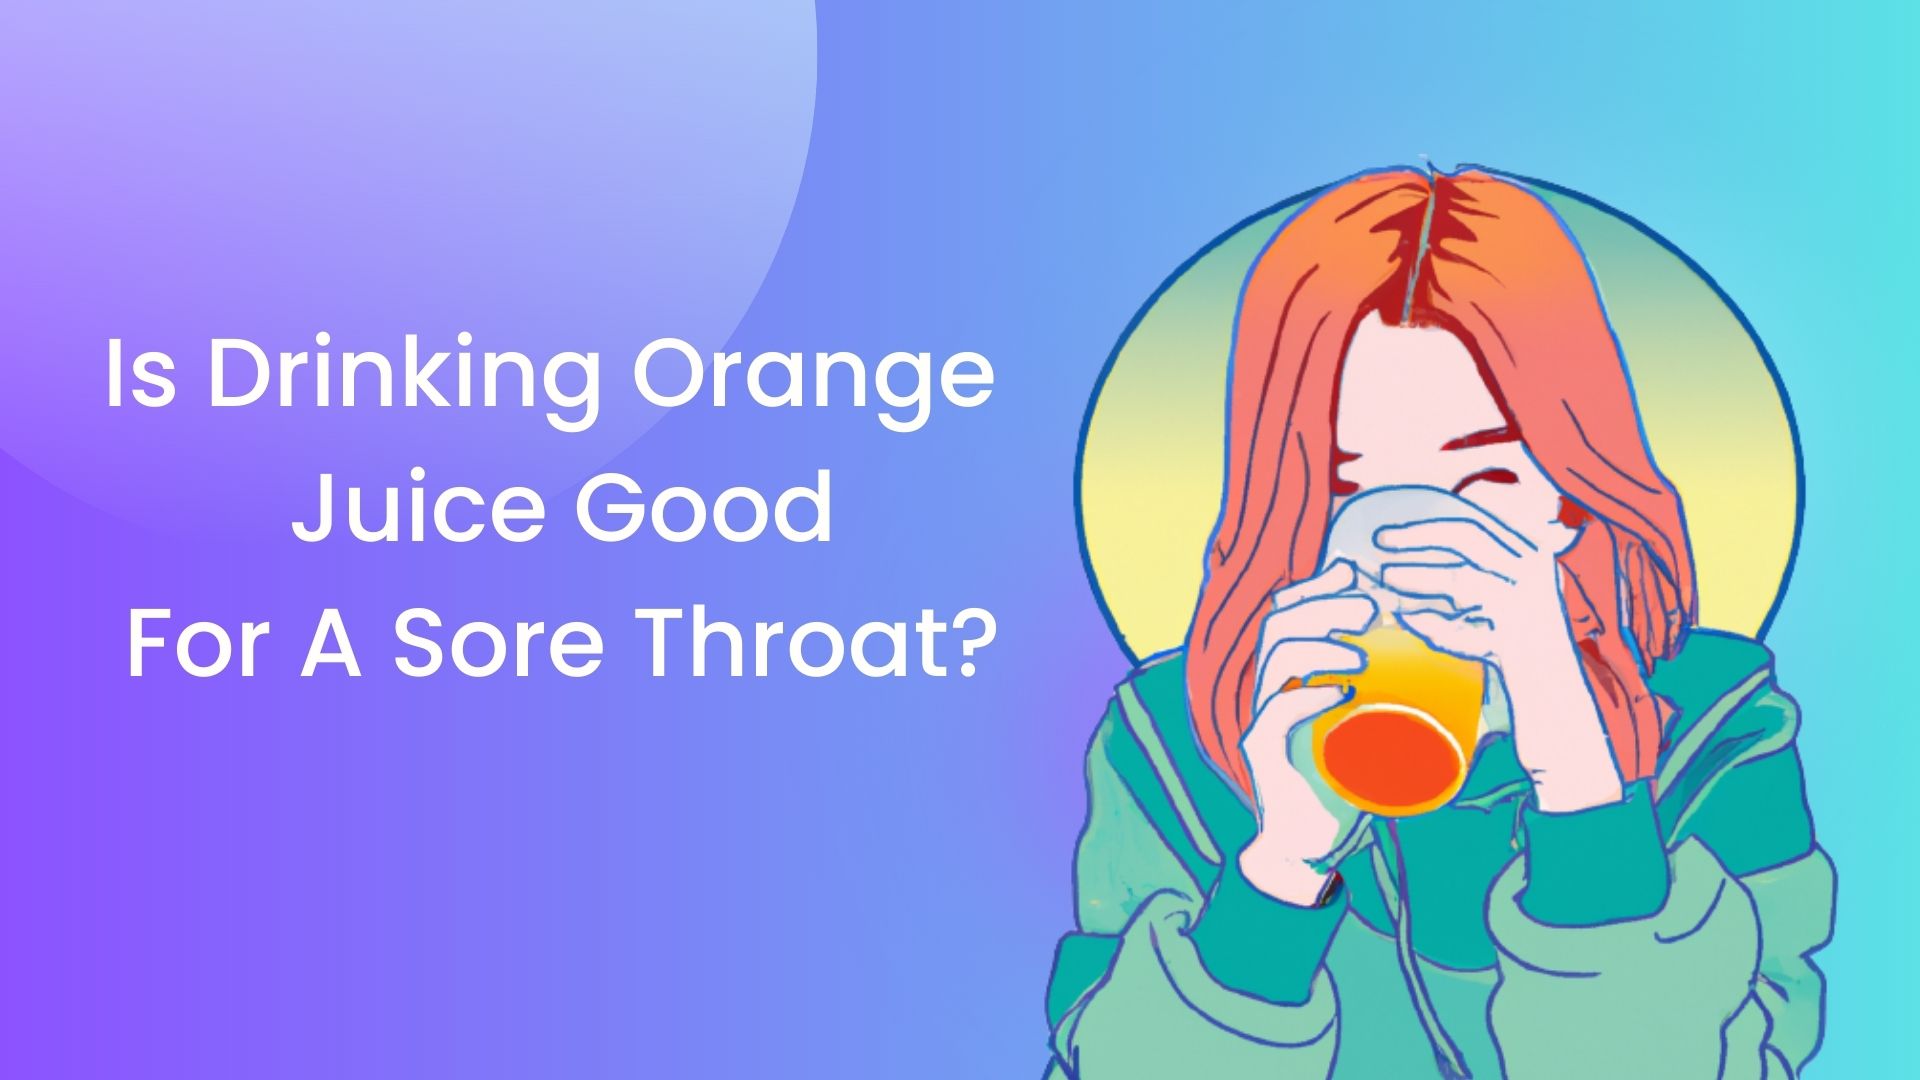 Can You Drink Orange Juice If You Have Sore Throat?